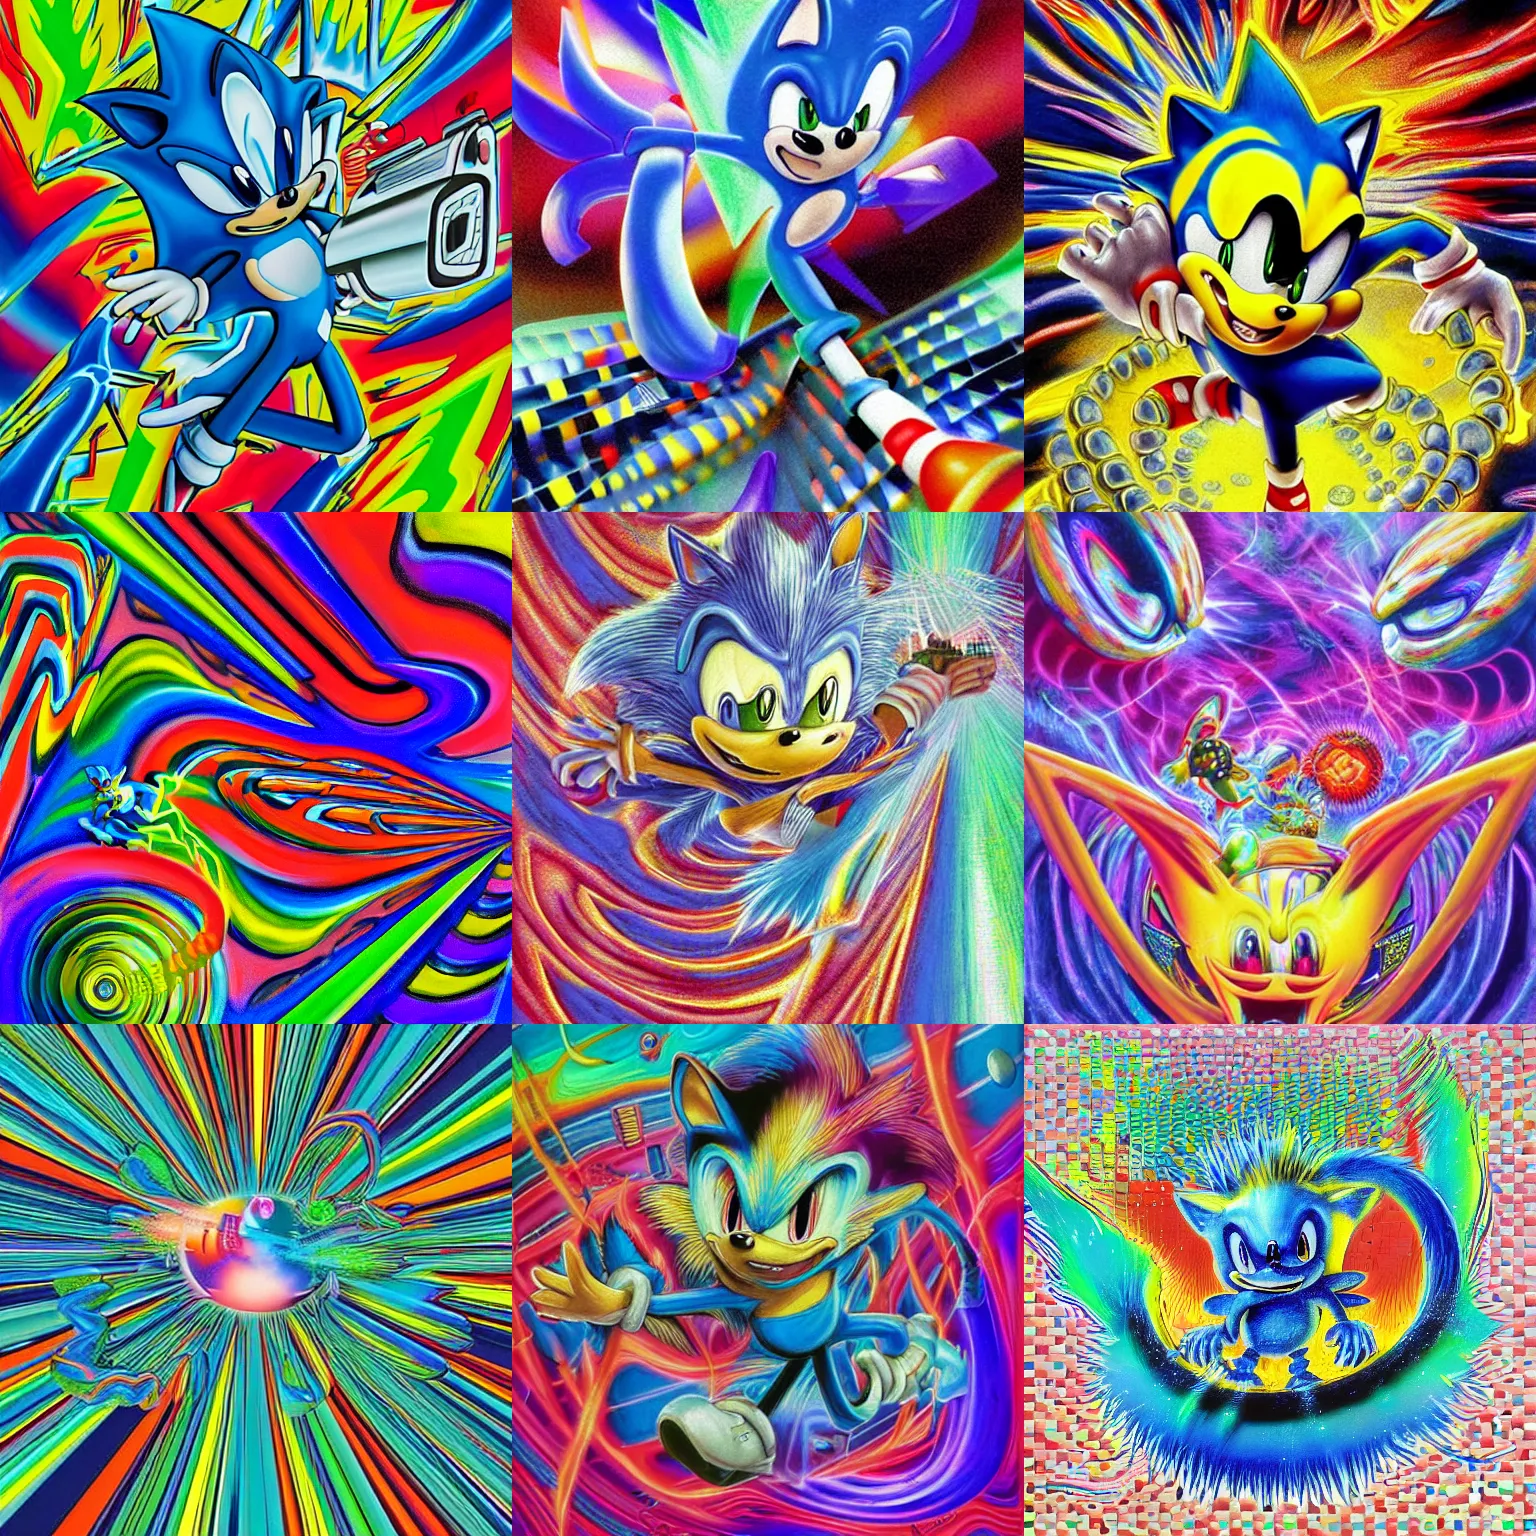 Prompt: surreal, sharp, detailed professional, soft pastels, high quality airbrush art of a liquid dissolving airbrush art lsd dmt sonic the hedgehog fracturing through cyberspace, blue checkerboard background, 1 9 9 0 s 1 9 9 2 sega genesis rareware video game album cover